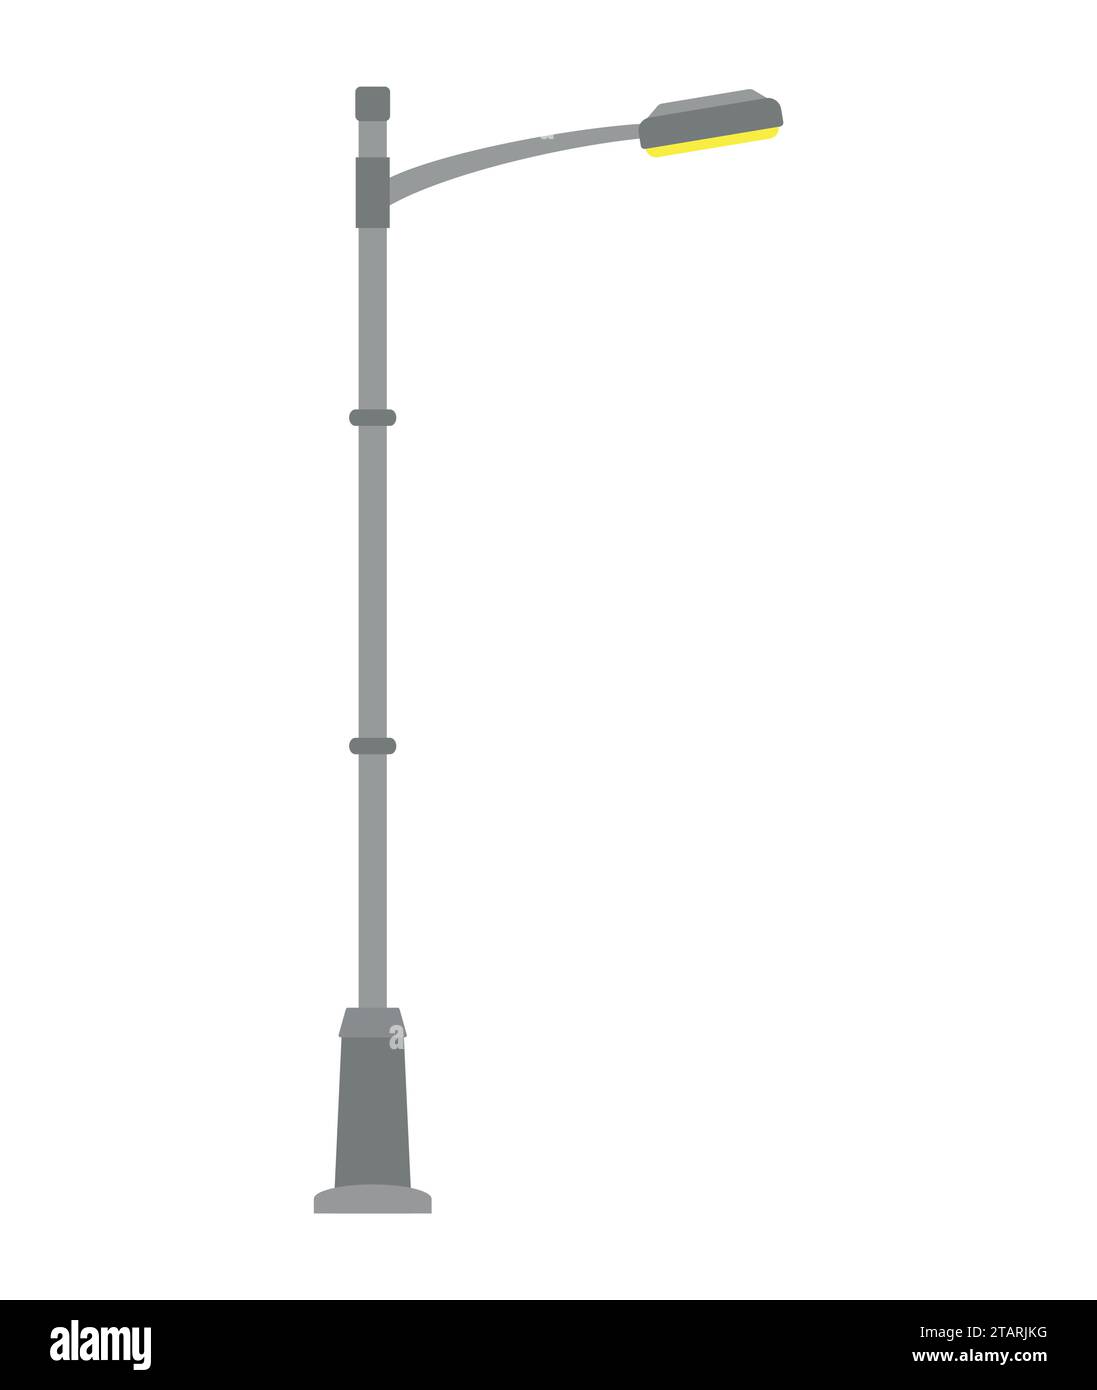 Street light isolated on white background. Outdoor Lamp post in flat style. Vector illustration Stock Vector